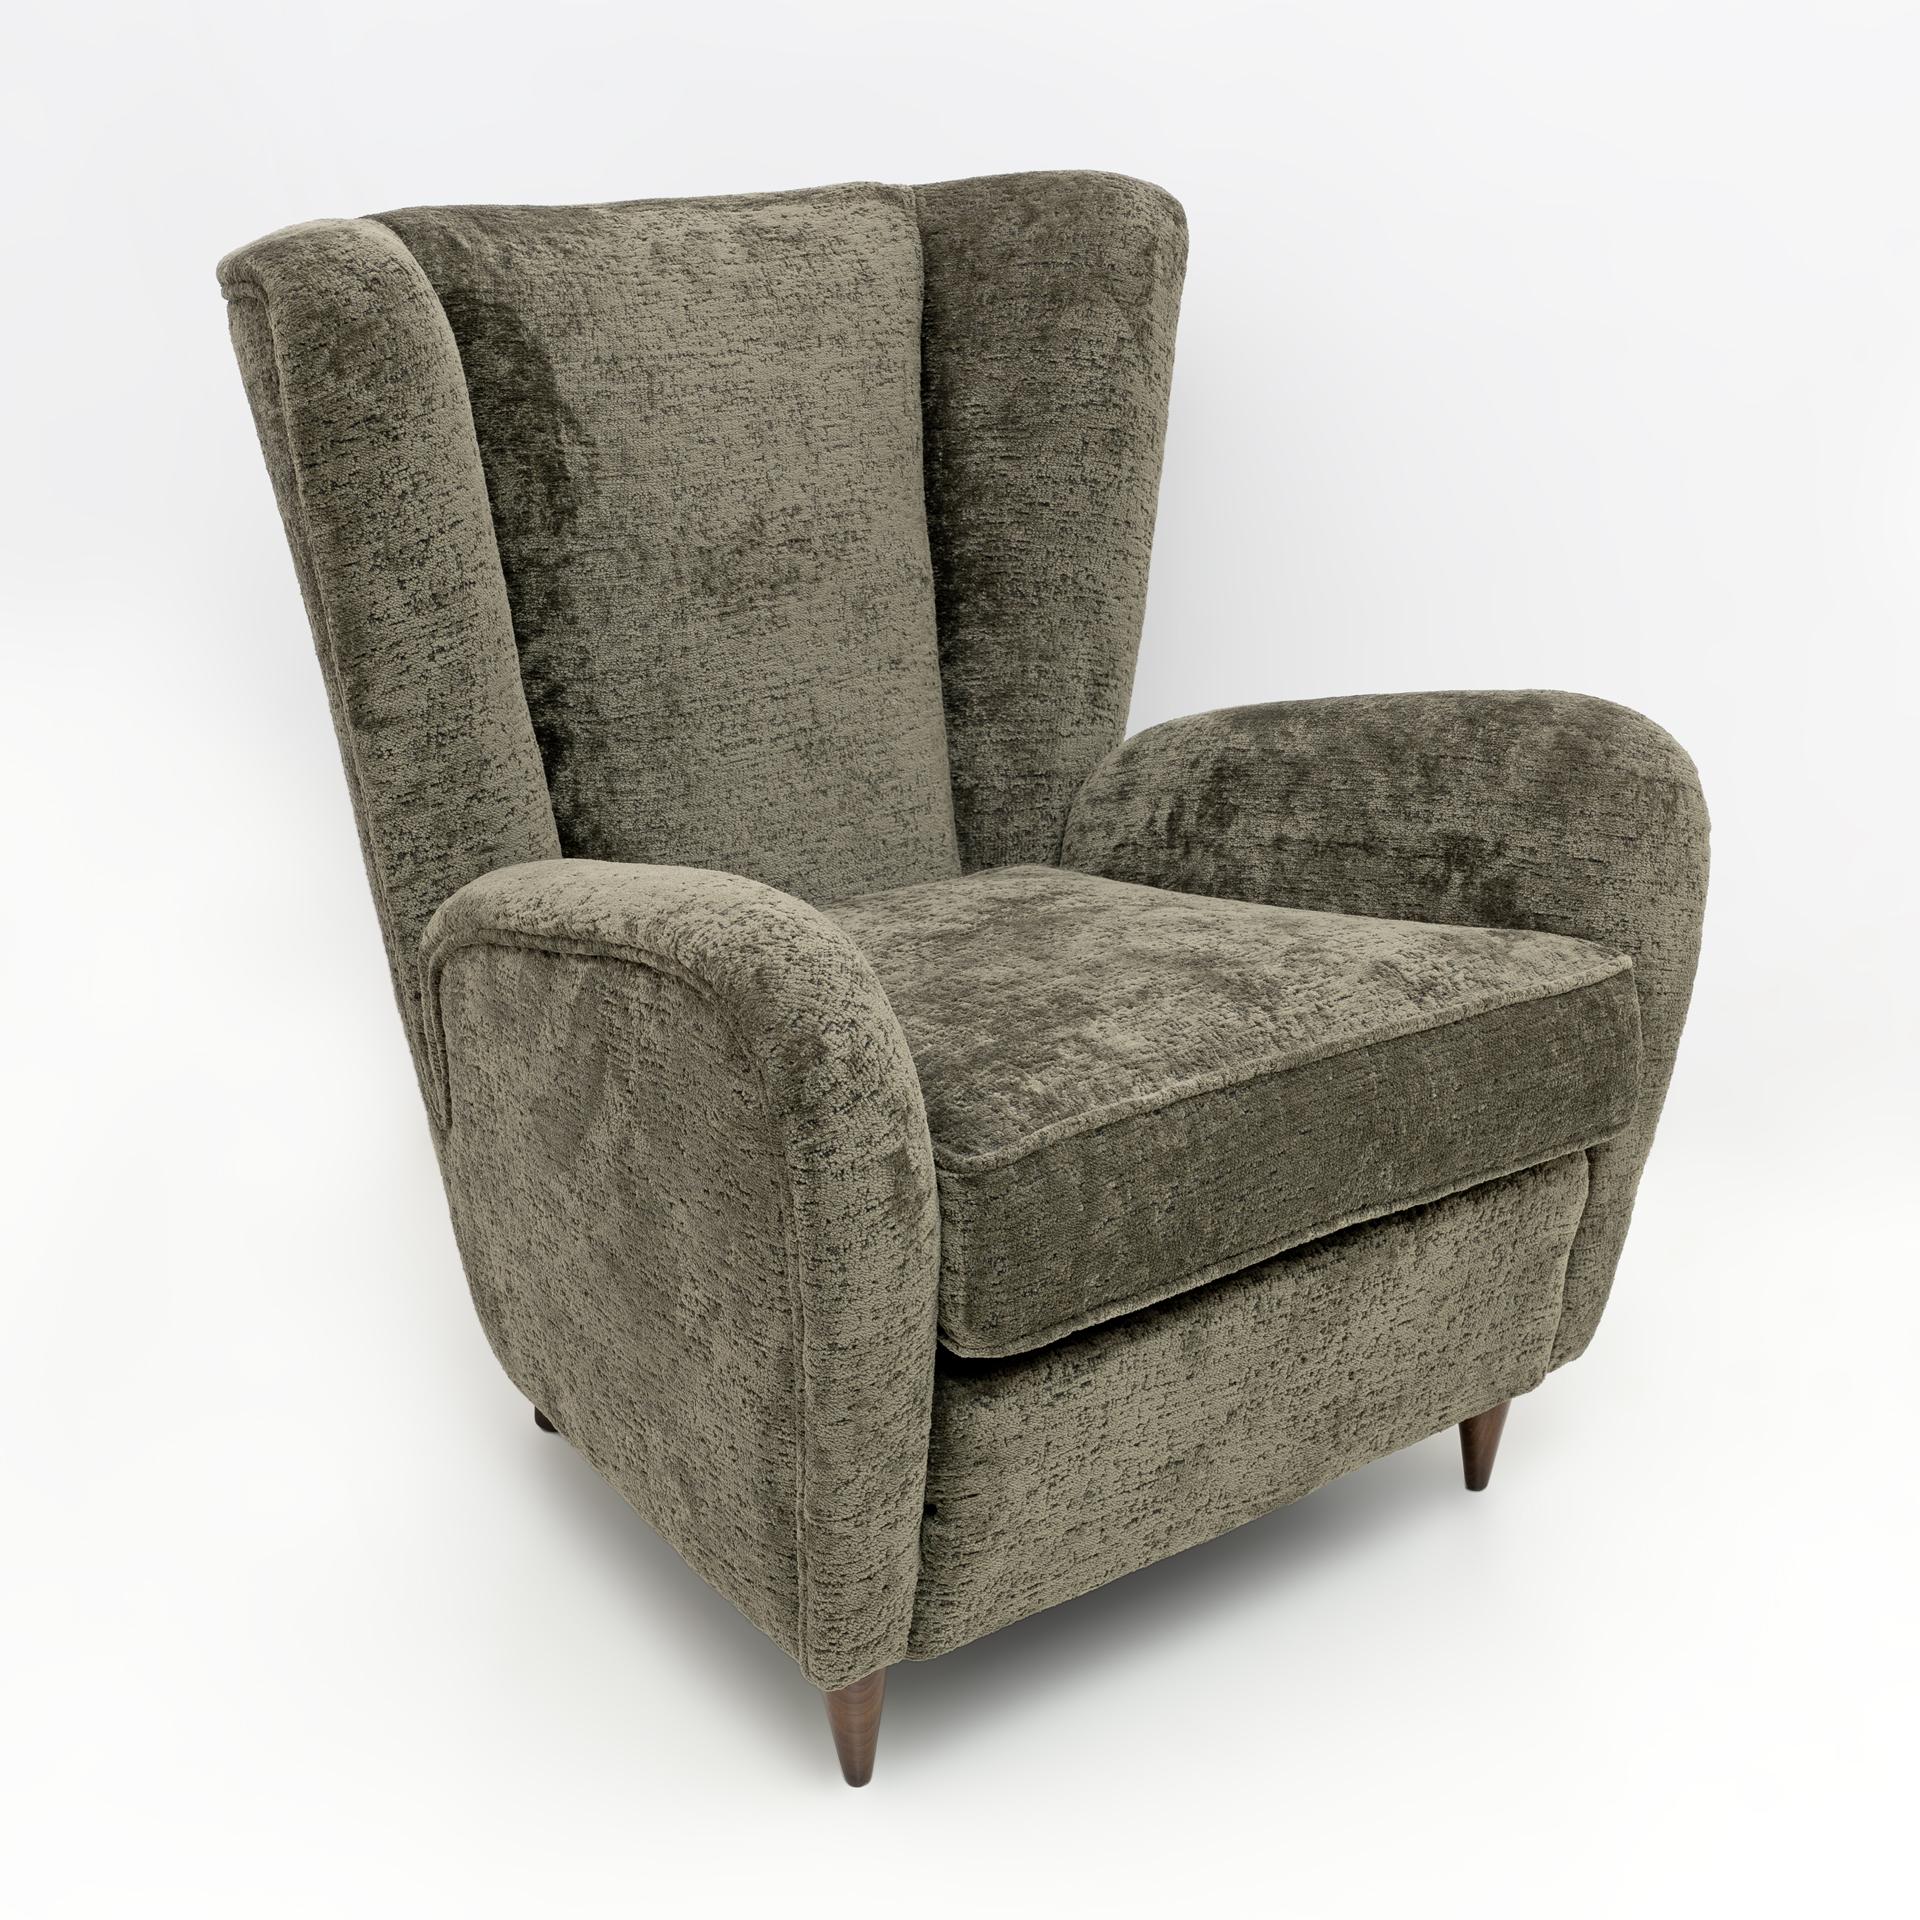 Beautiful armchair with curved armrests, made by Paolo Buffa in 1950. The curved and padded wooden structure, the covering has been replaced with a beautiful very dark green Bouclè fabric, as shown in the photo. Ready to furnish your home